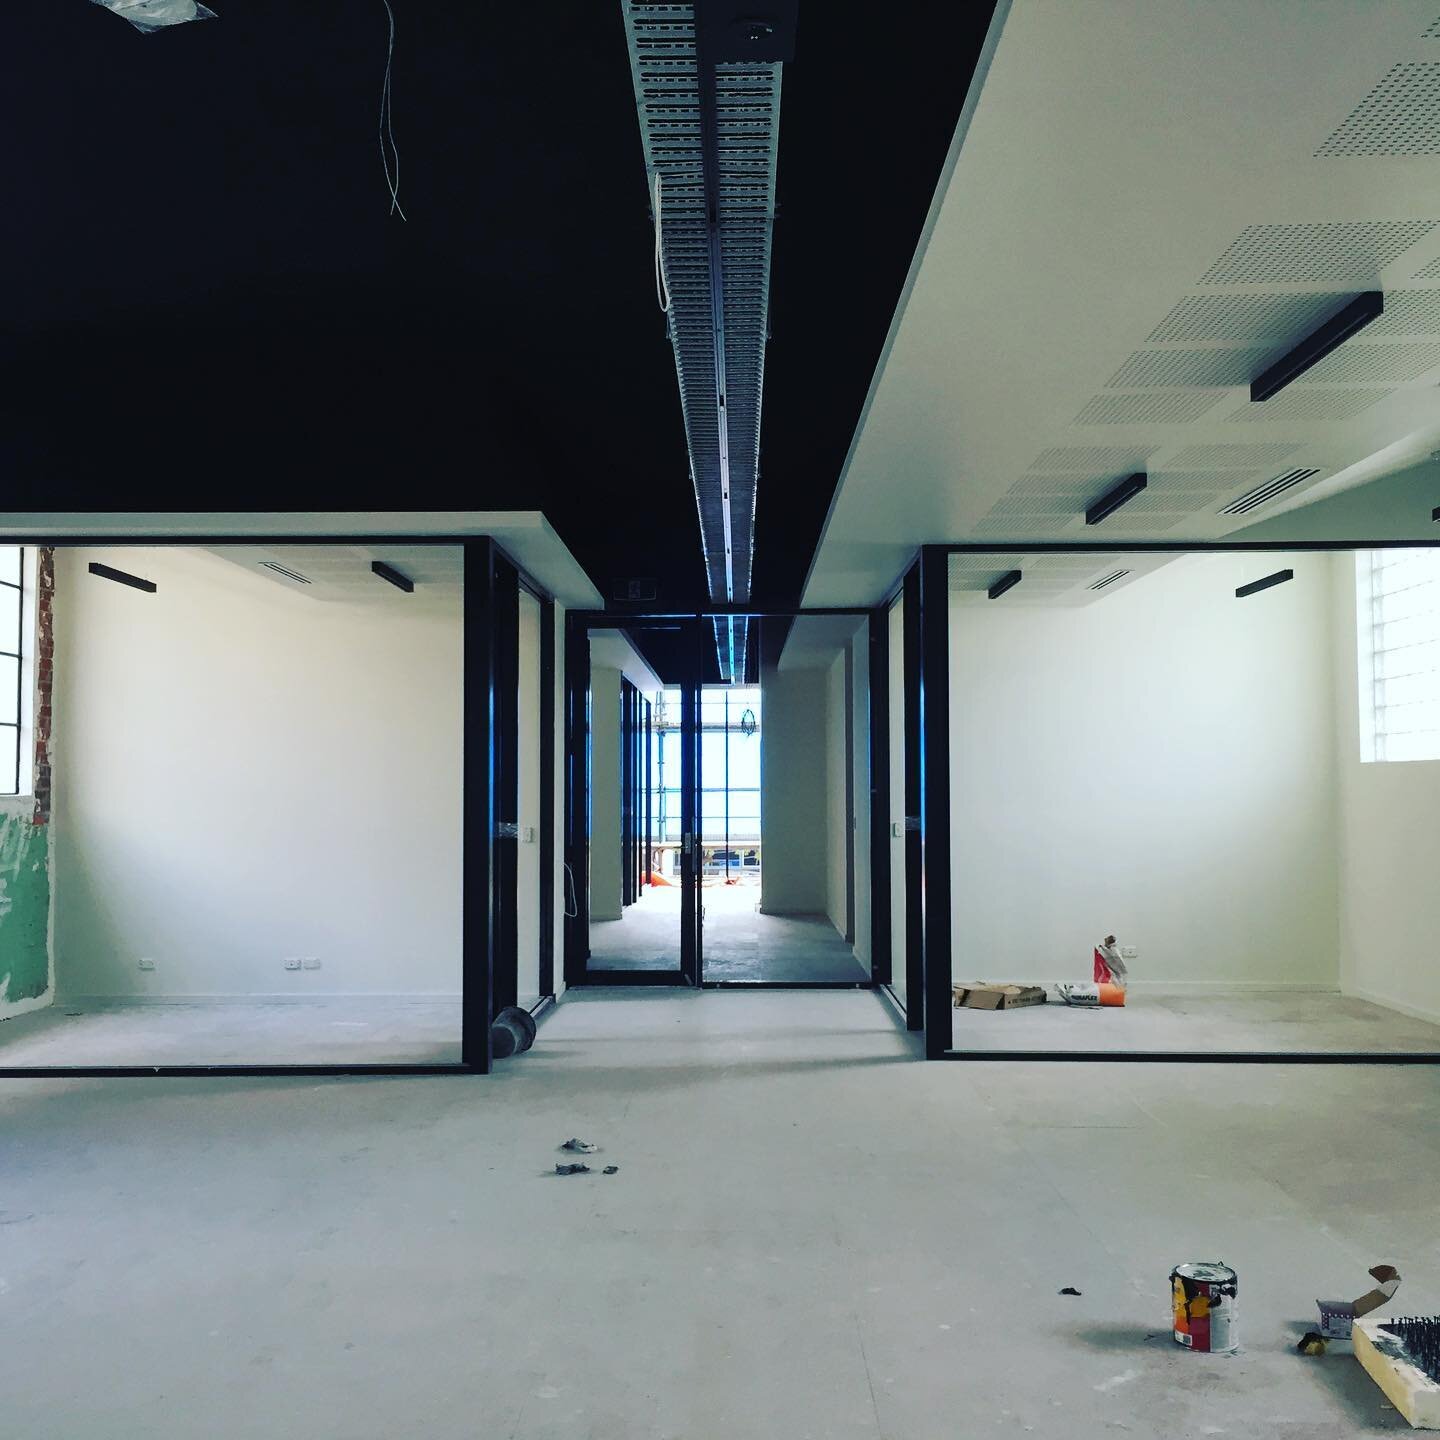 Boutique office space taking shape..watch this space...#corporatedesign#officedesigns #warehouseoffice